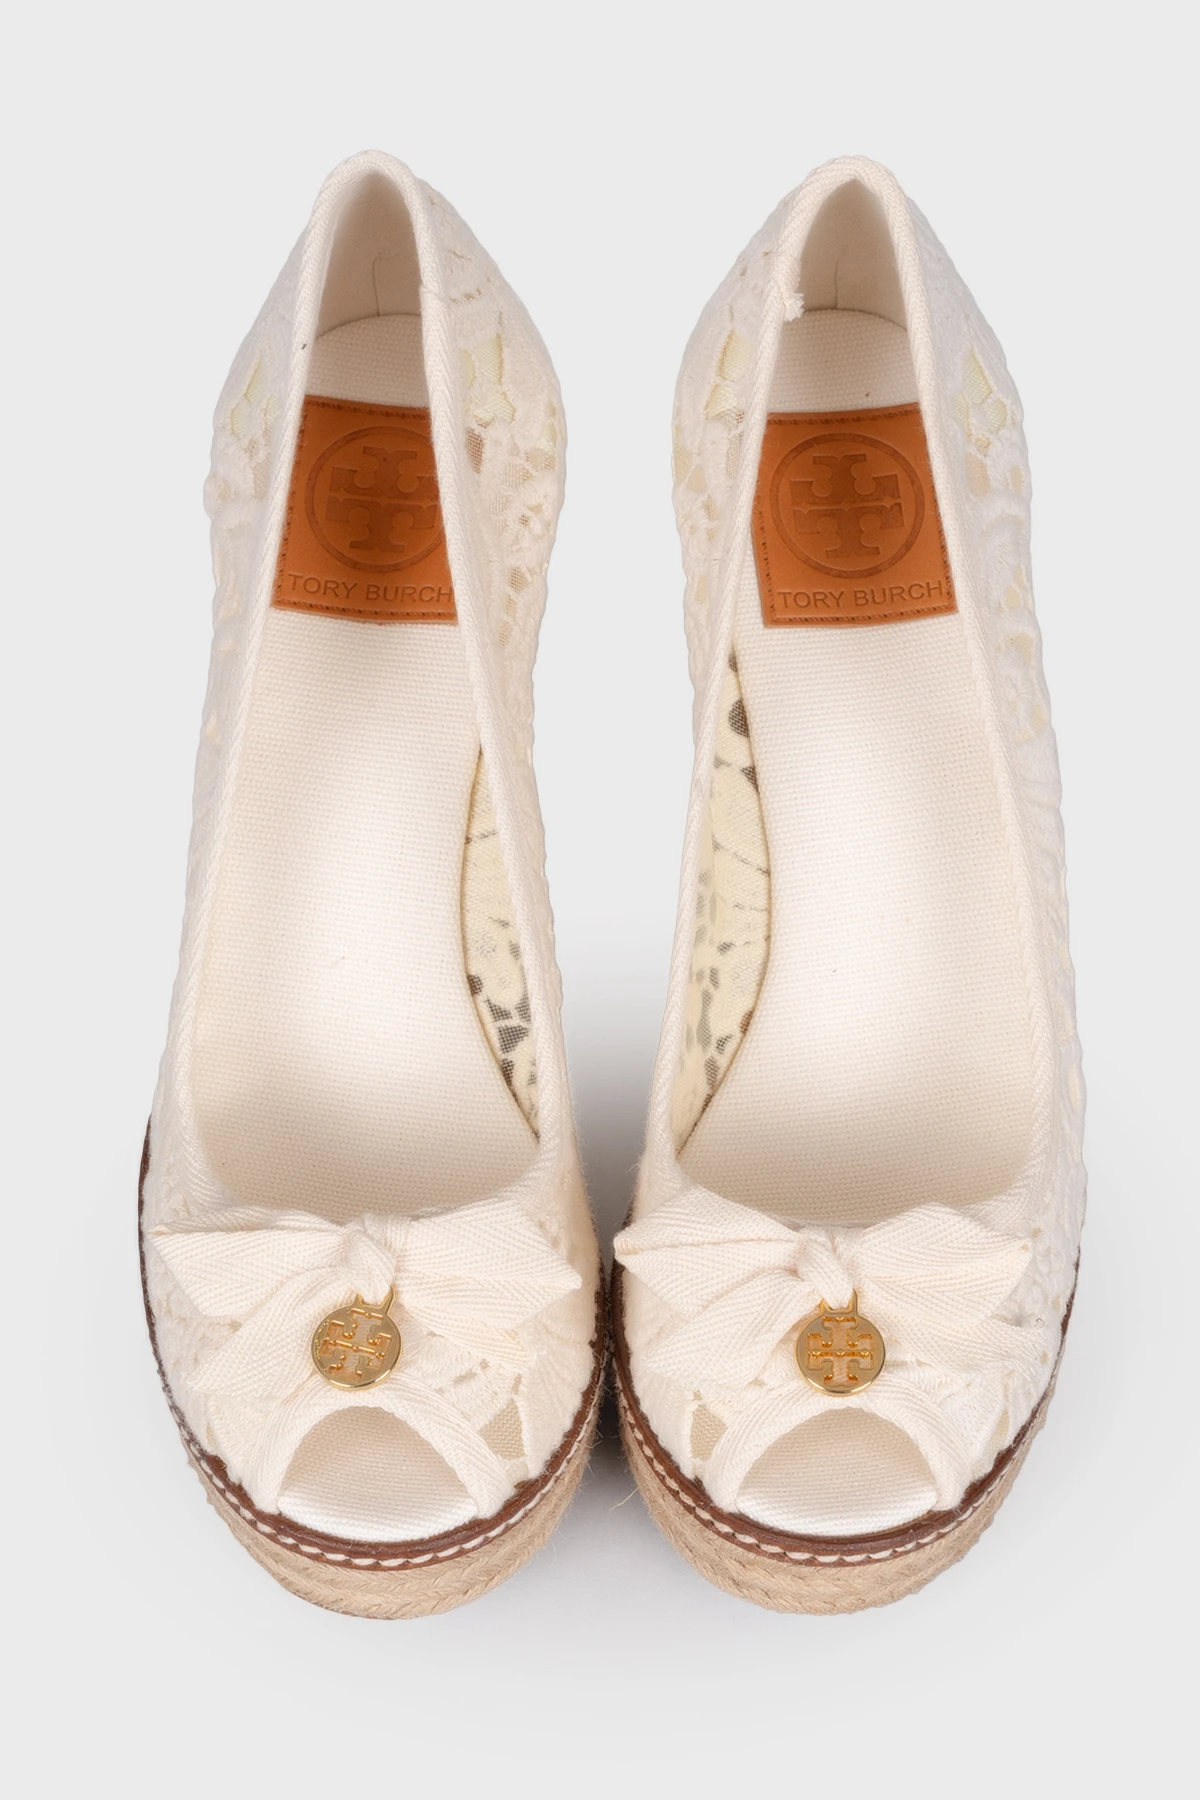 Tory Burch Sandals with lace wedges - ReOriginal